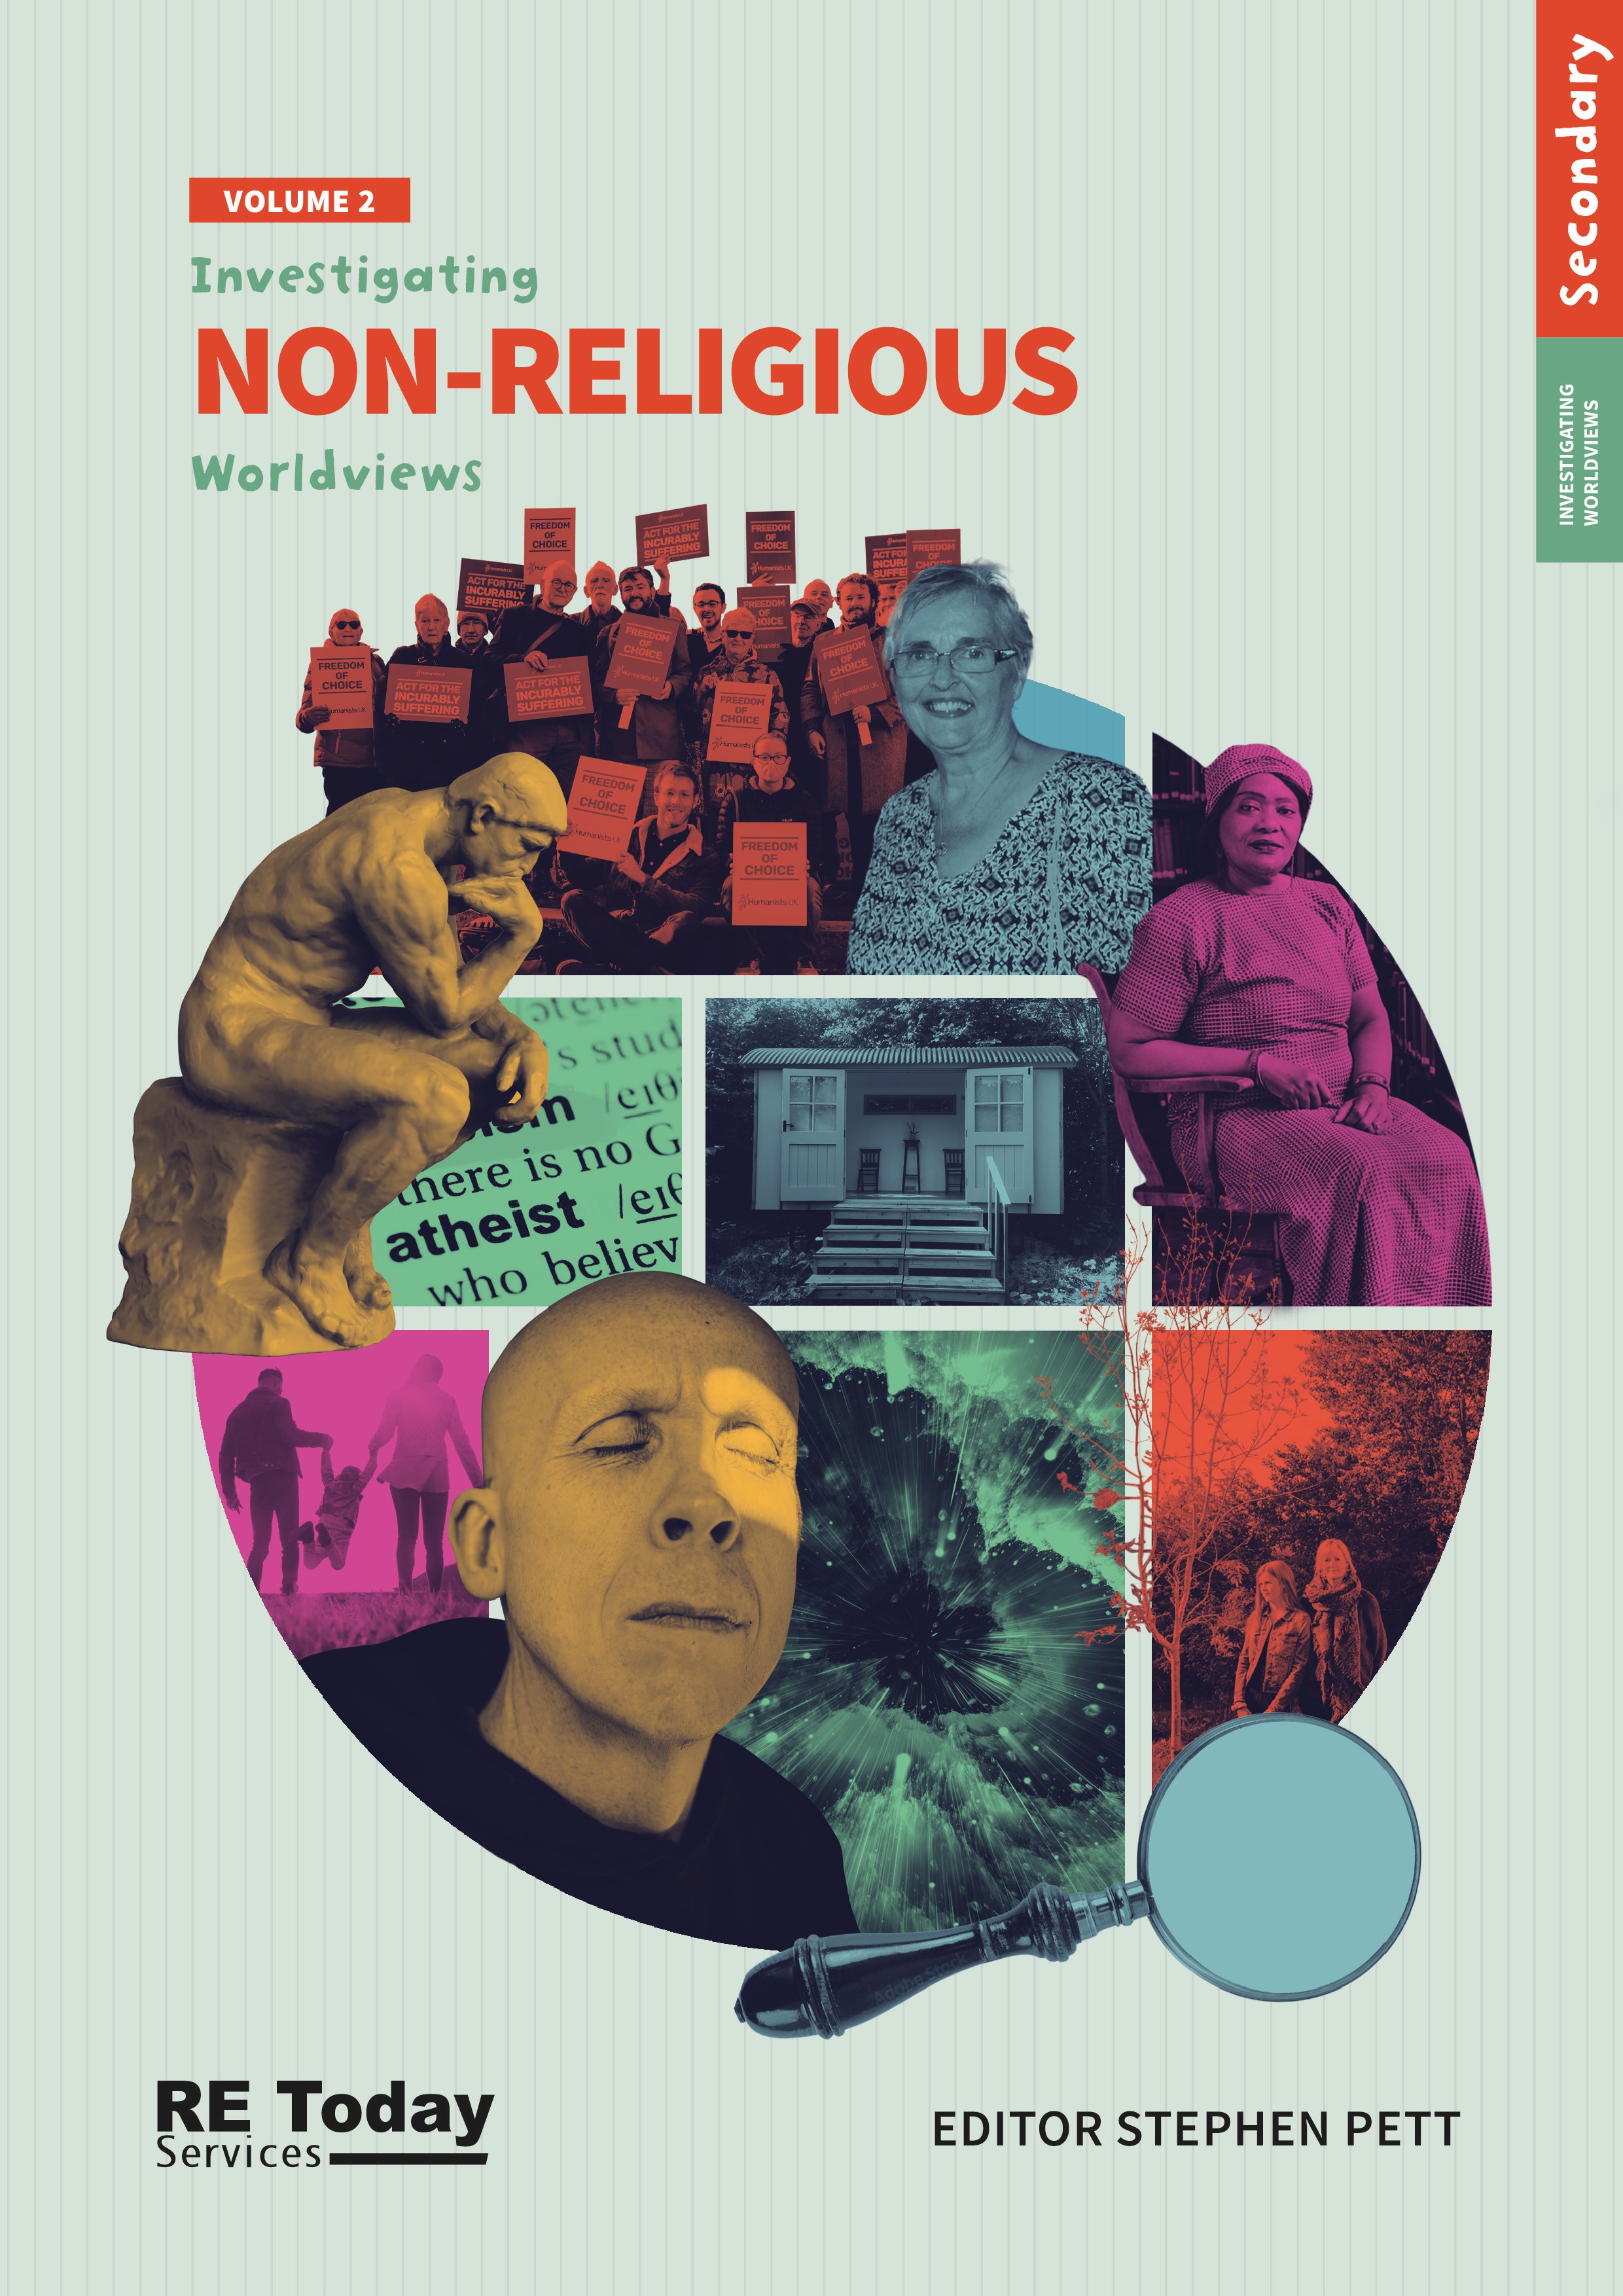 Secondary Religious education curriculum book - investigating non-religious worldviews - RE Today services